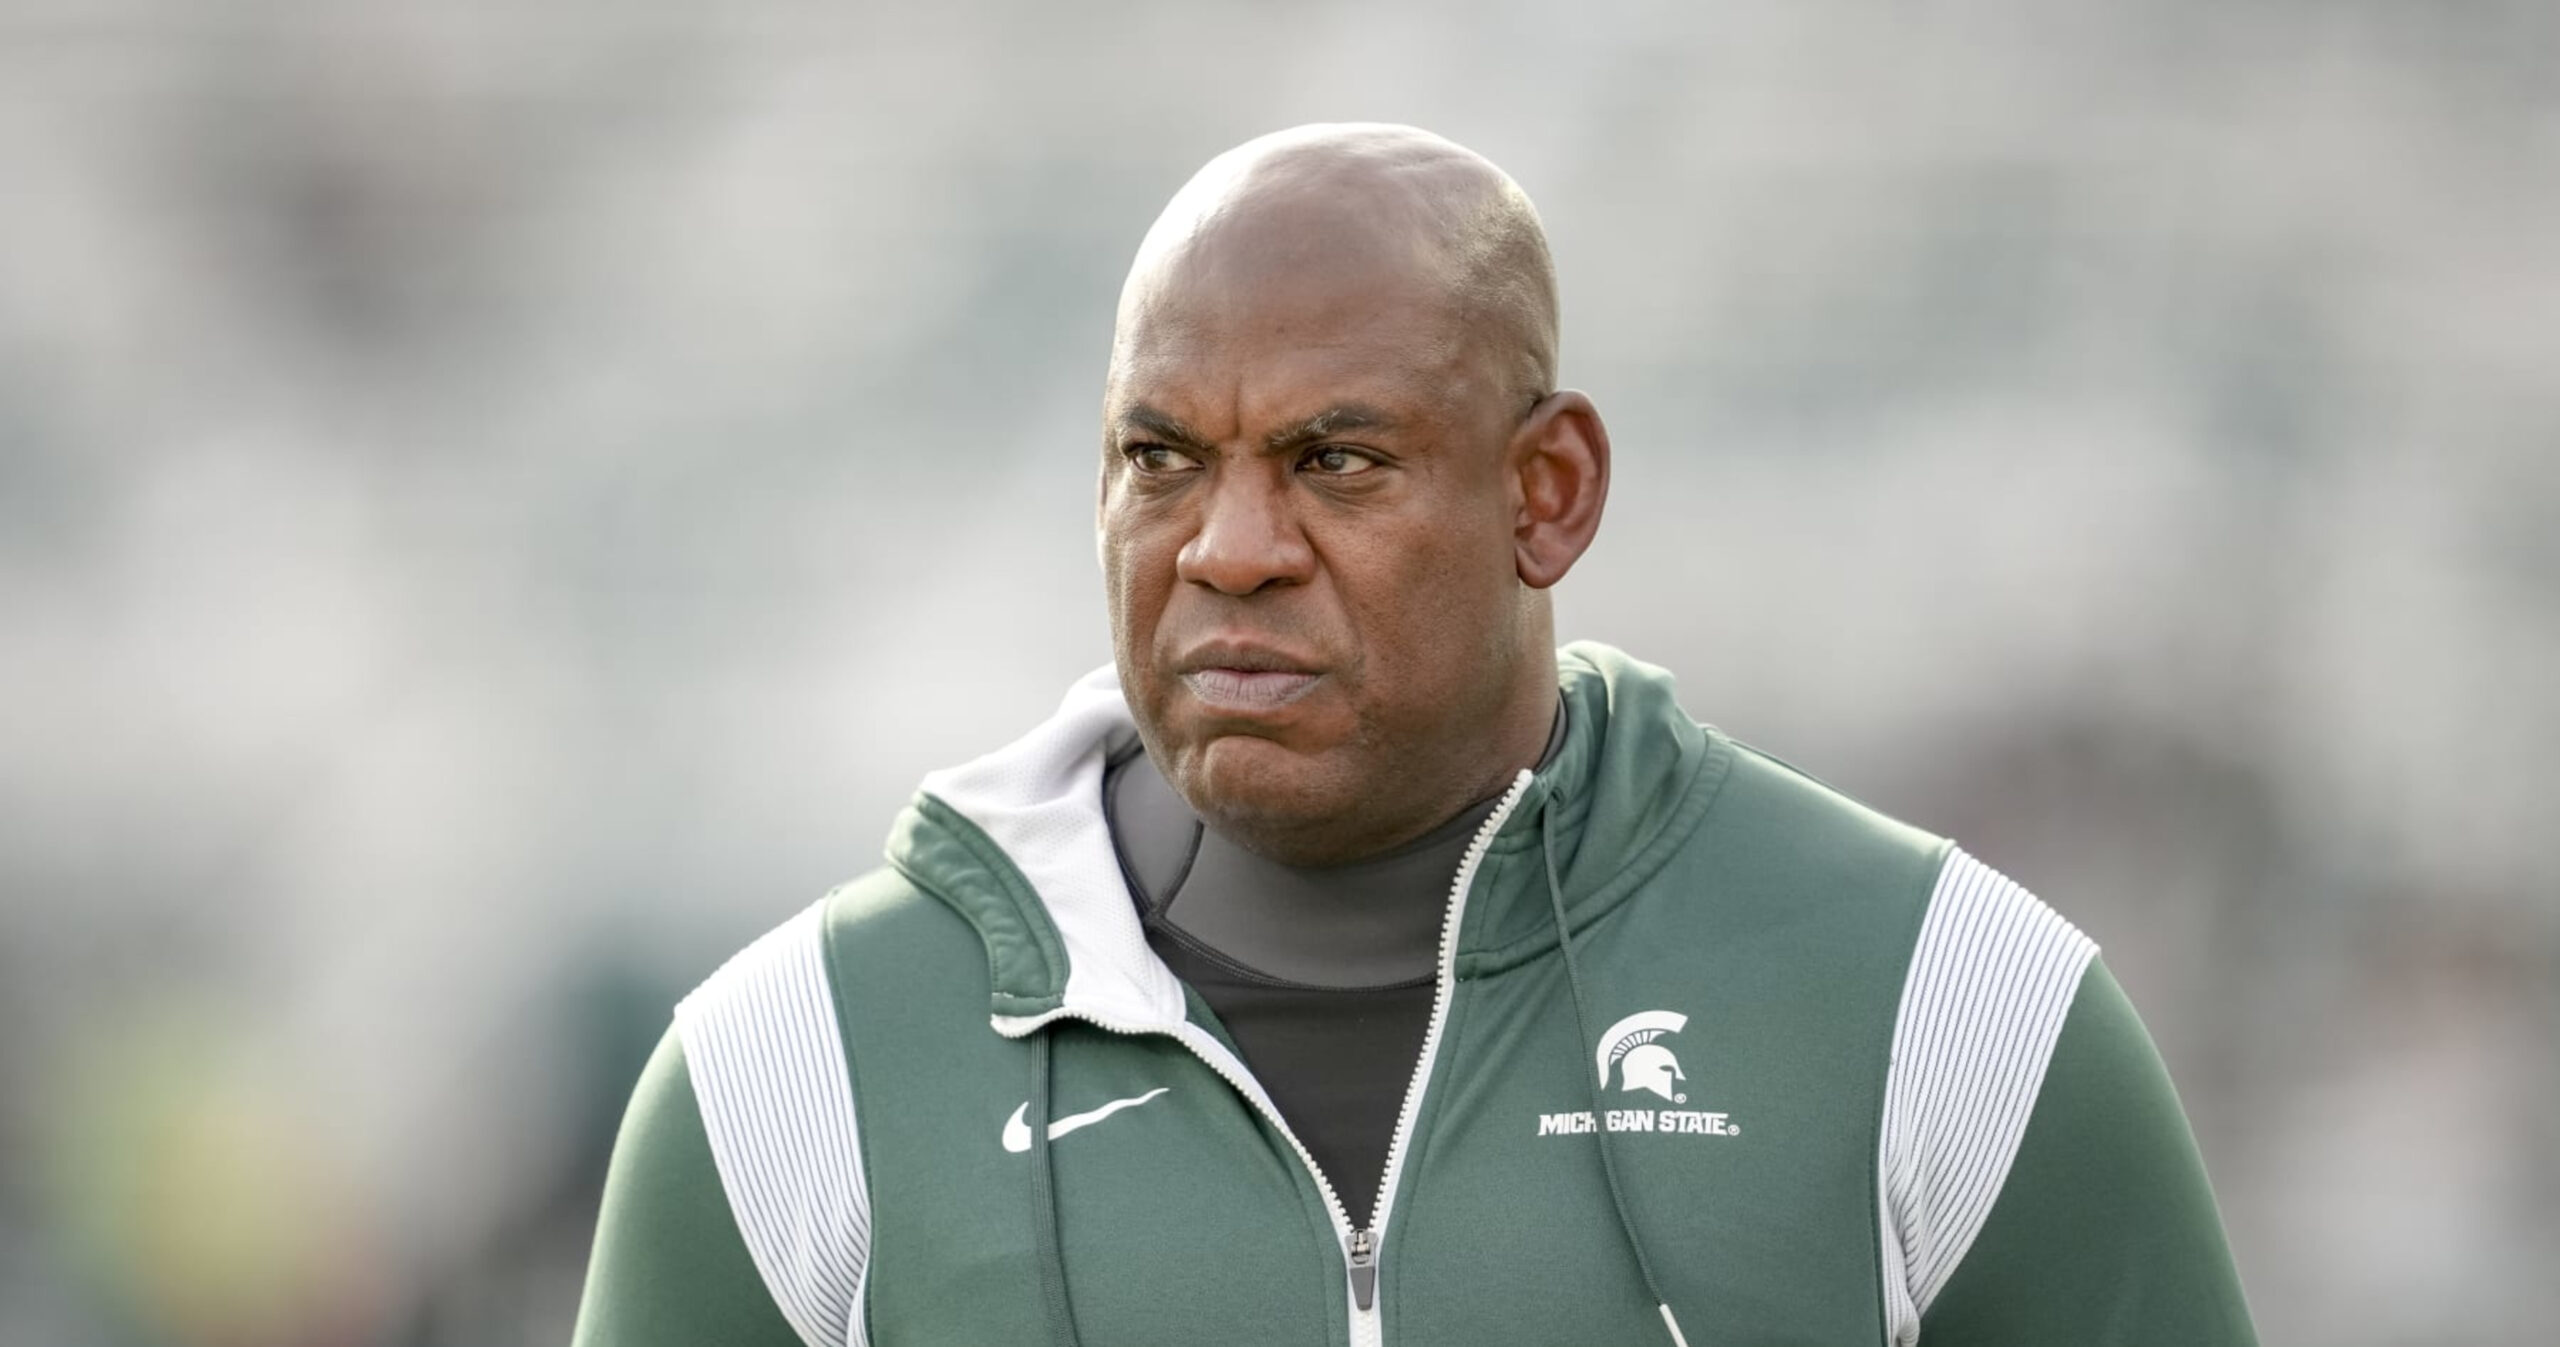 Report: Michigan State’s Mel Tucker Subject of Sexual Harassment Investigation